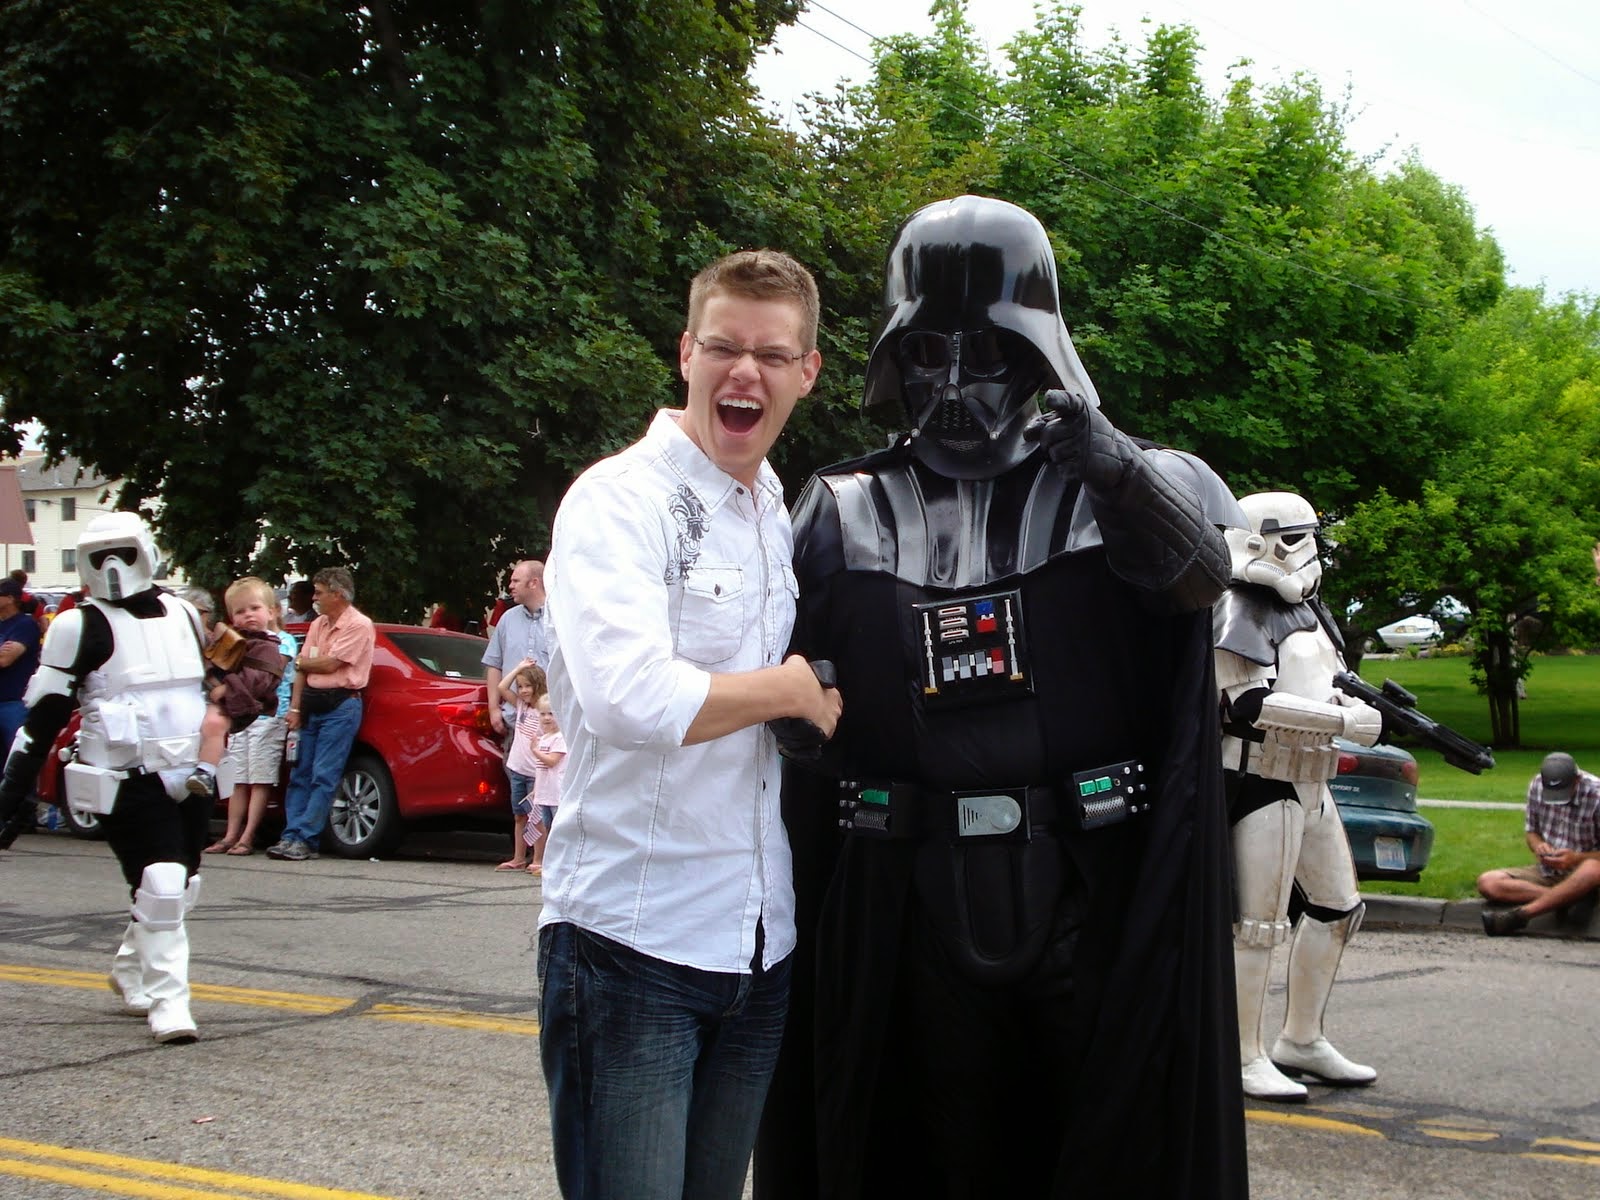 ... and I'm friends with Darth Vader